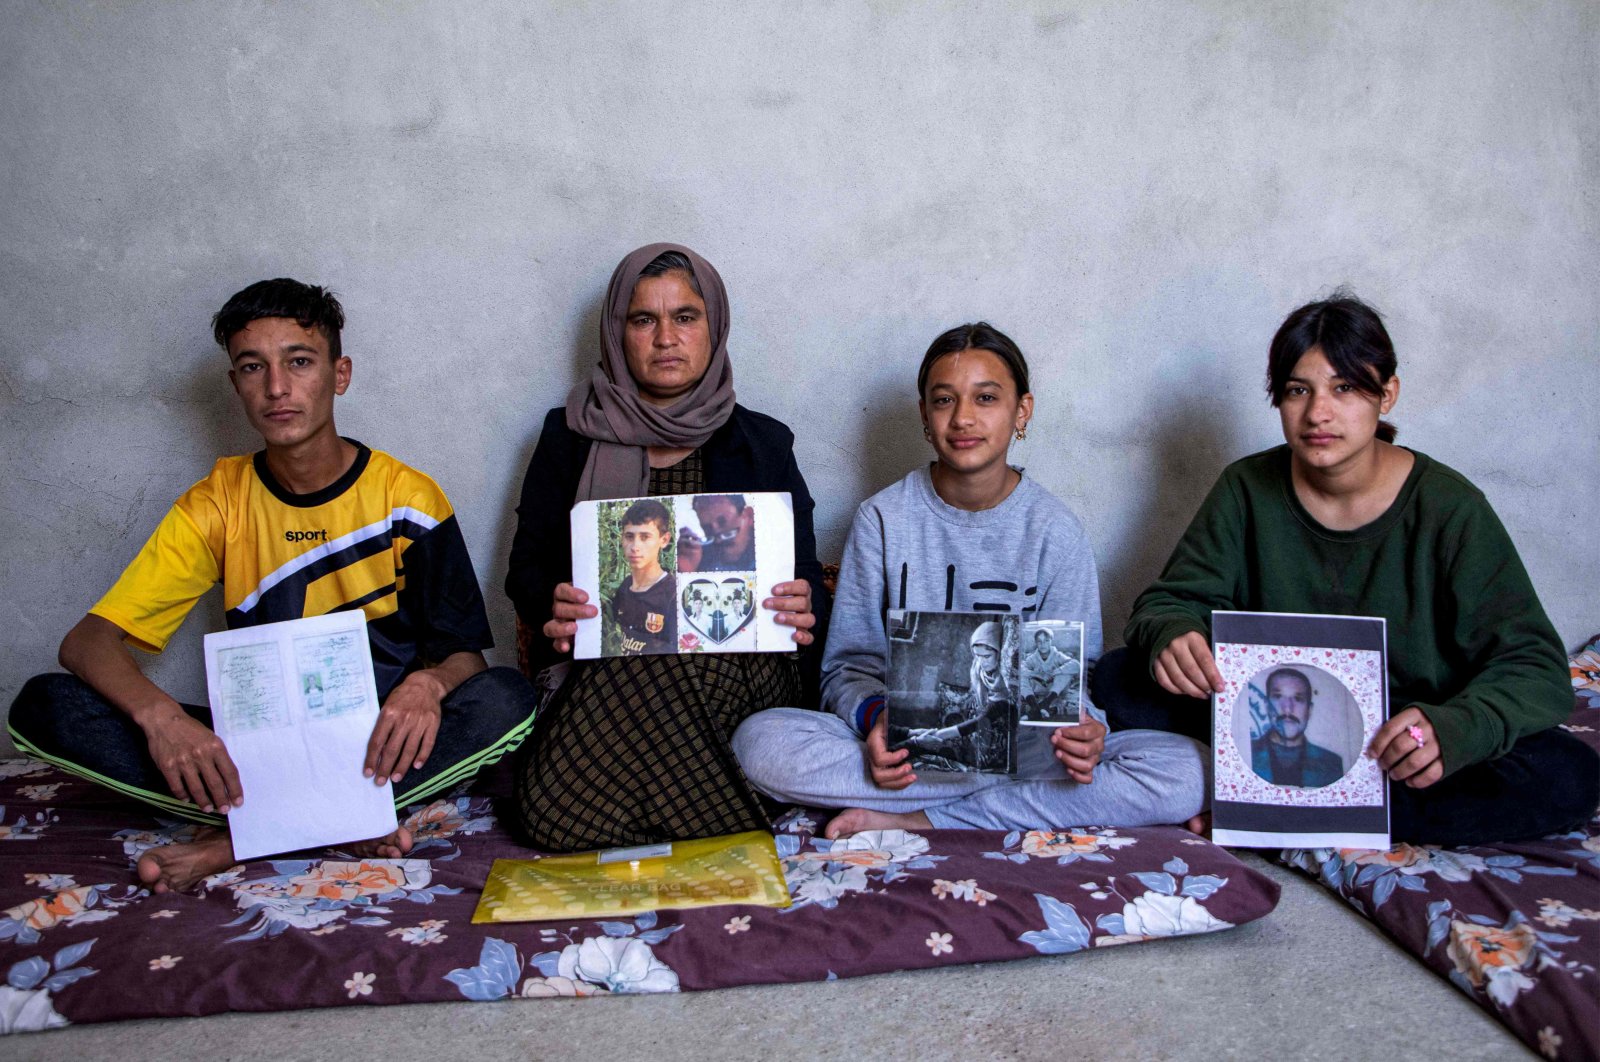 Bahar Elias, a 40-year-old displaced Iraqi woman from the Yazidi community, poses for a picture with her son and daughters while holding pictures of other family members kidnapped by Daesh, during an interview at the Sharya camp near Dohuk city in northern Iraq, April 22, 2023. (AFP Photo)